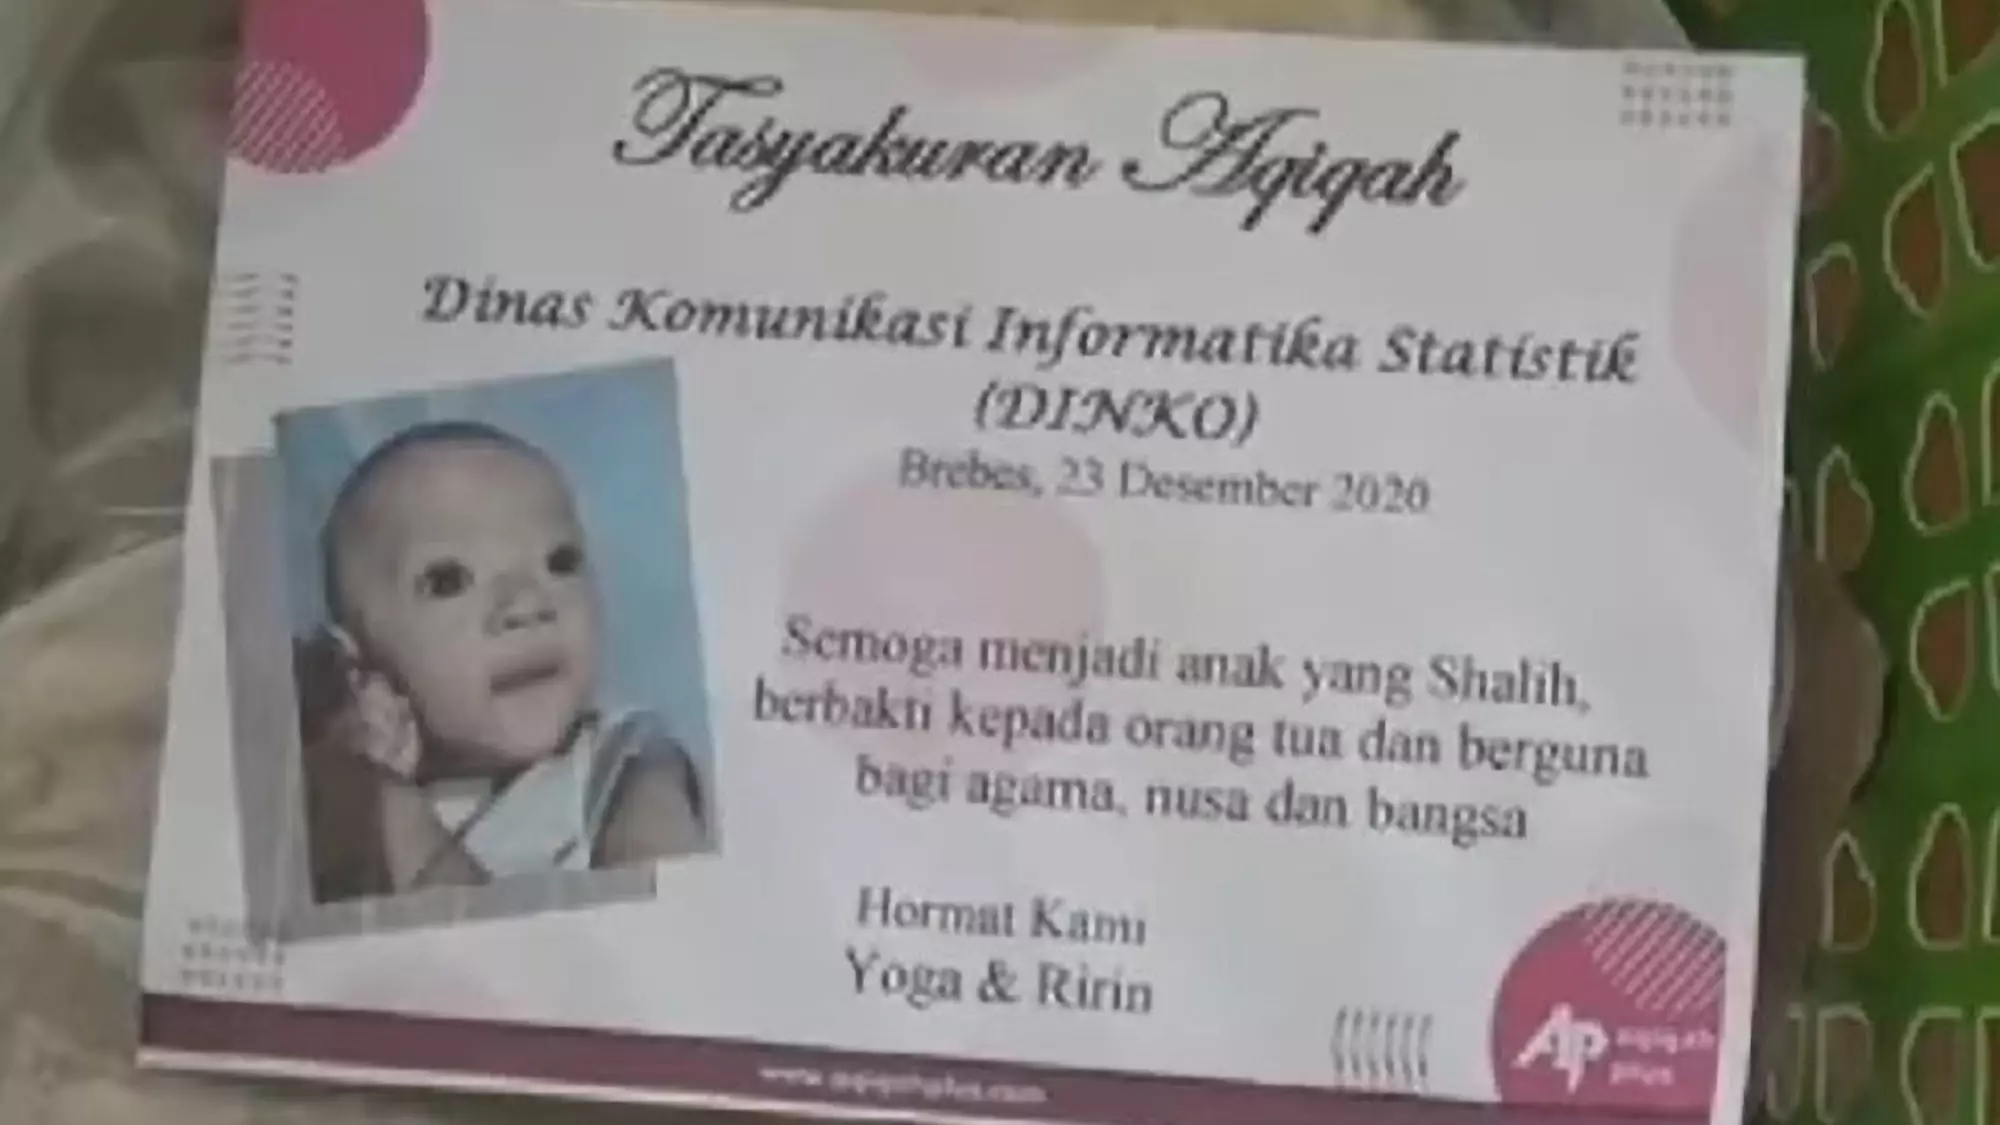 Father Names Newborn Son 'Department Of Statistical Information'